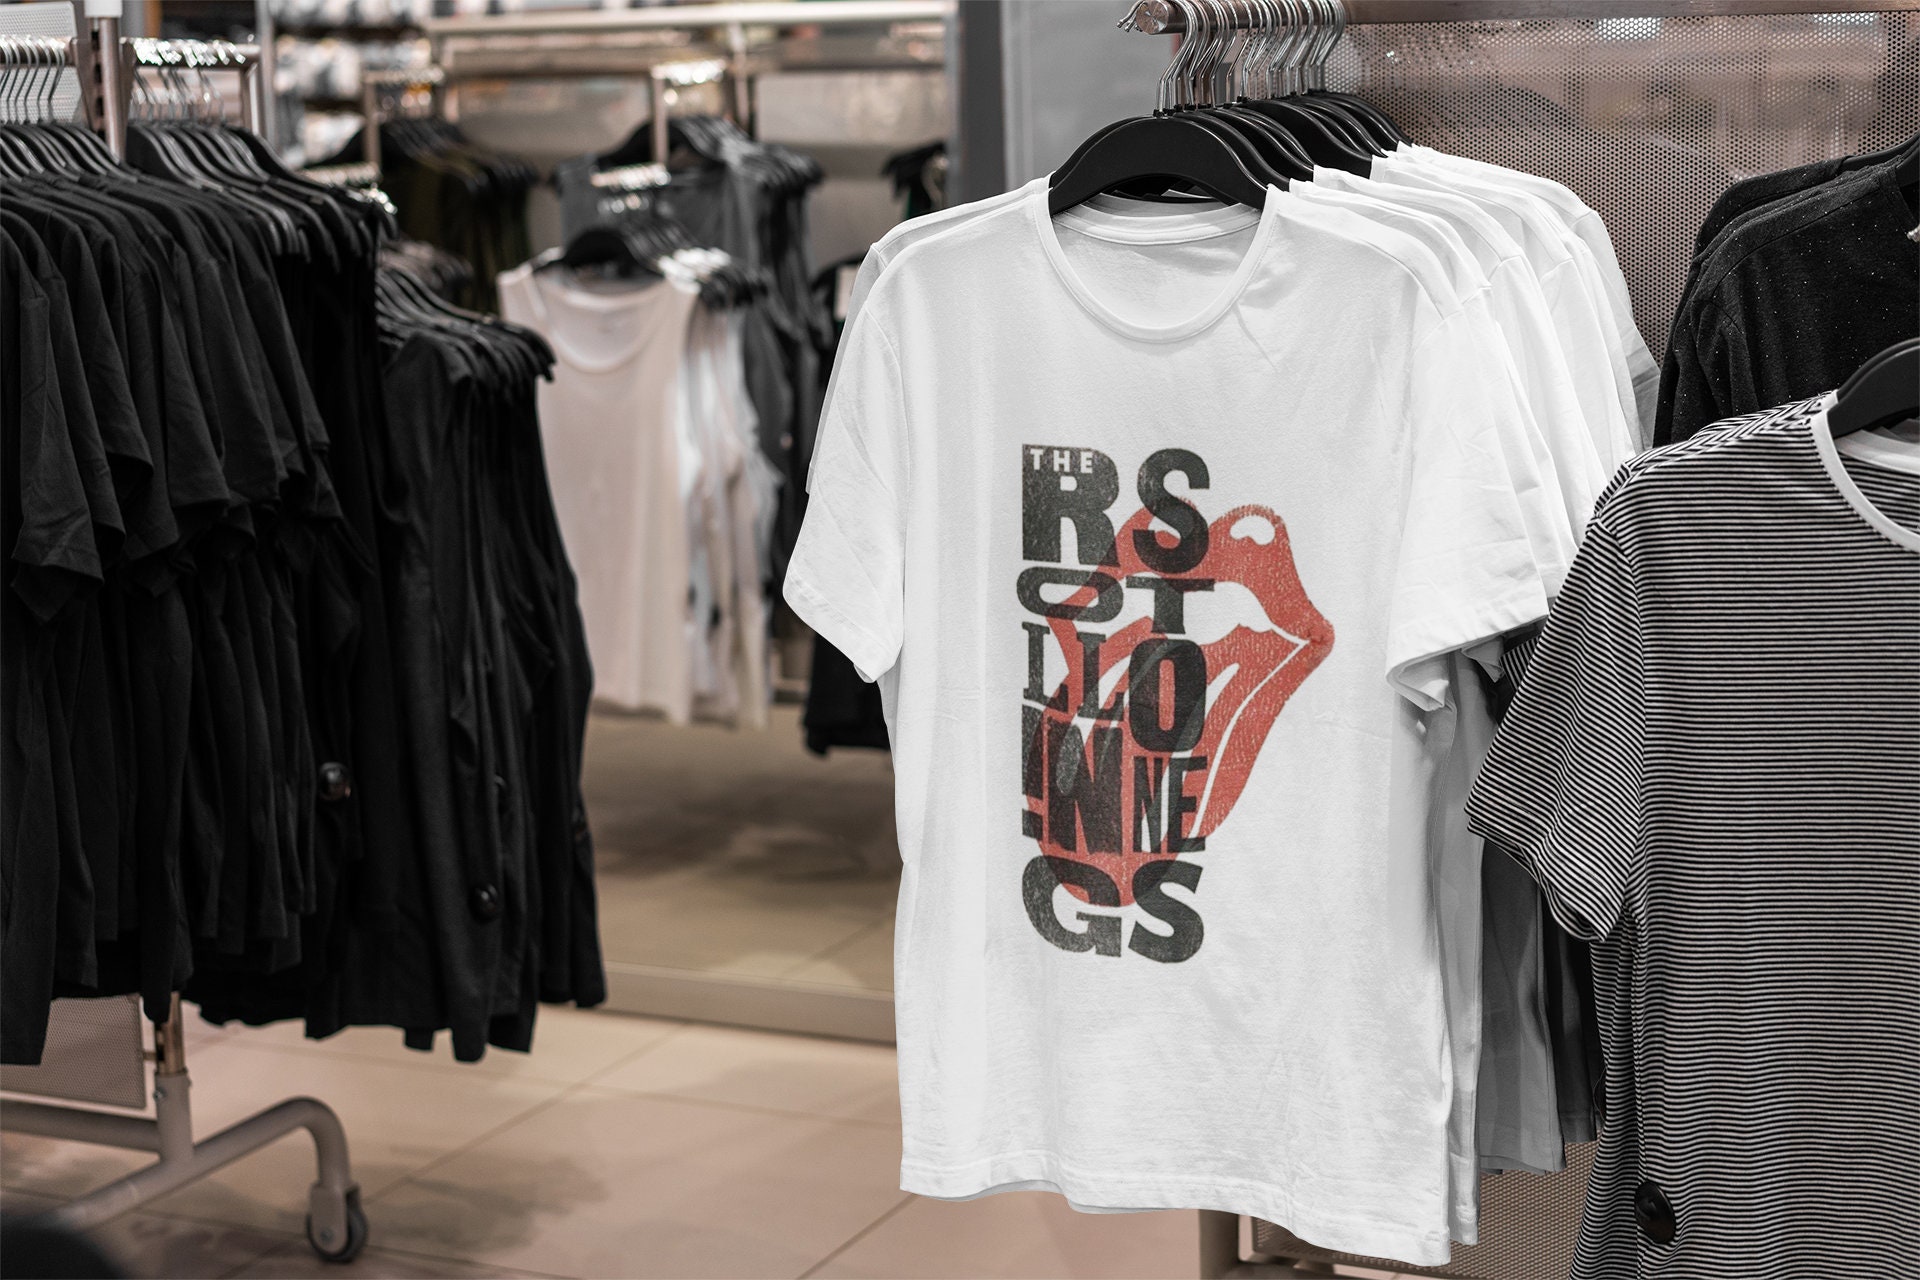 Discover Les Rolling Stones T-Shirt